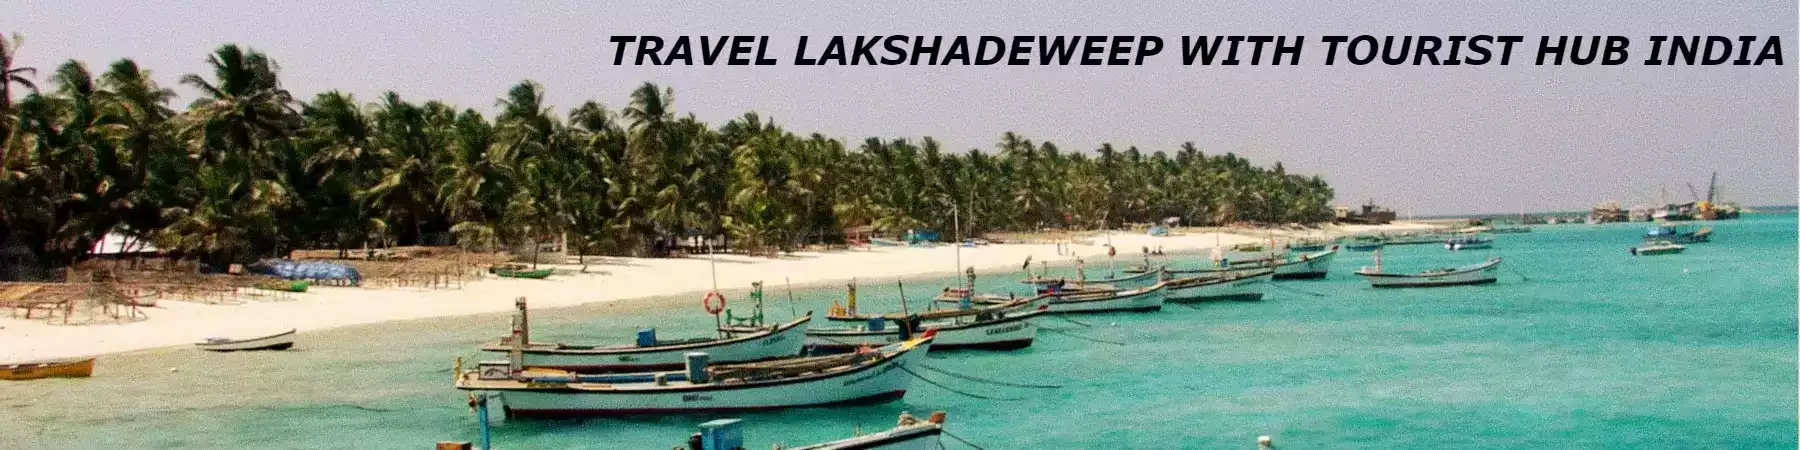 Lakshadweep holiday packages from Trivandrum with Tourist Hub India - The Best Lakshadweep Travel Agency